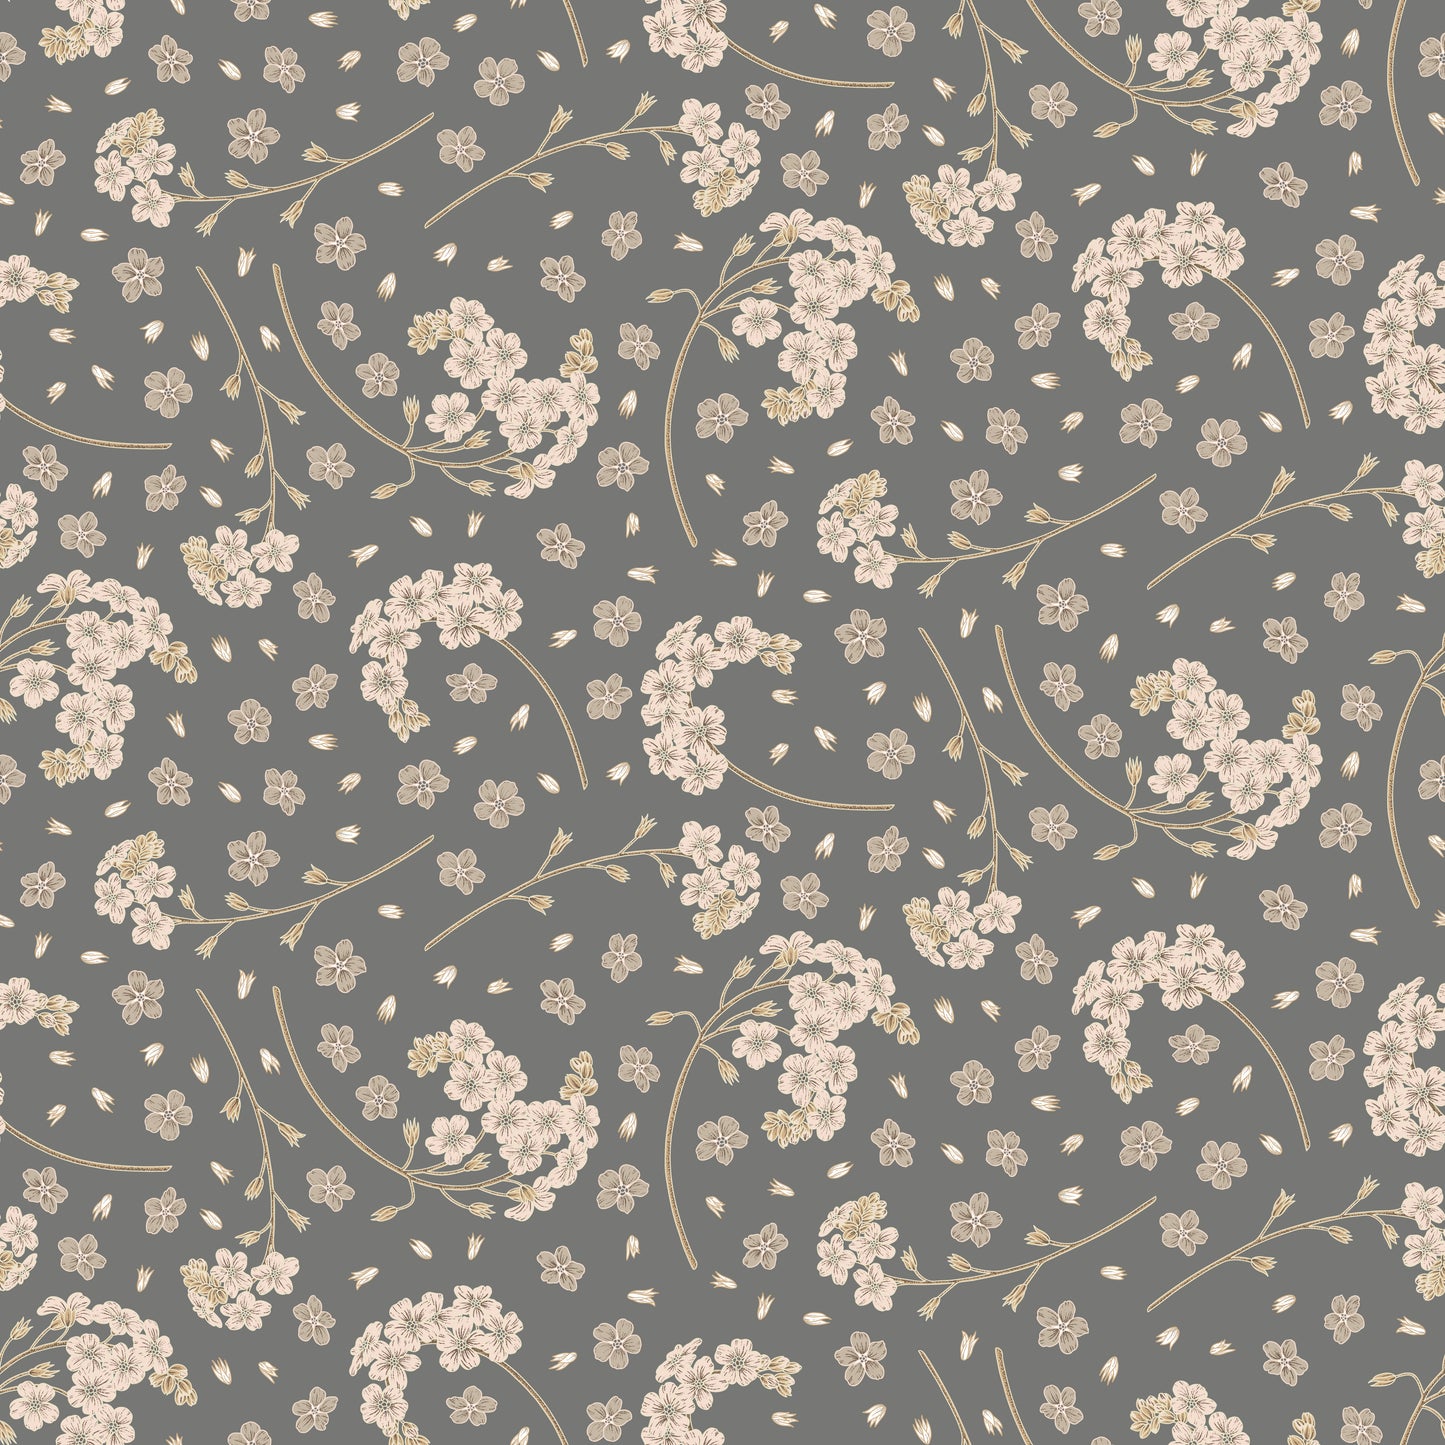 cream/beige forget me not flowers on grey/gray  background easy to install and remove peel and stick custom wallpaper available in different lengths/sizes locally created and printed in Canada. Removable, washable, durable, commercial grade, customizable and water proof.